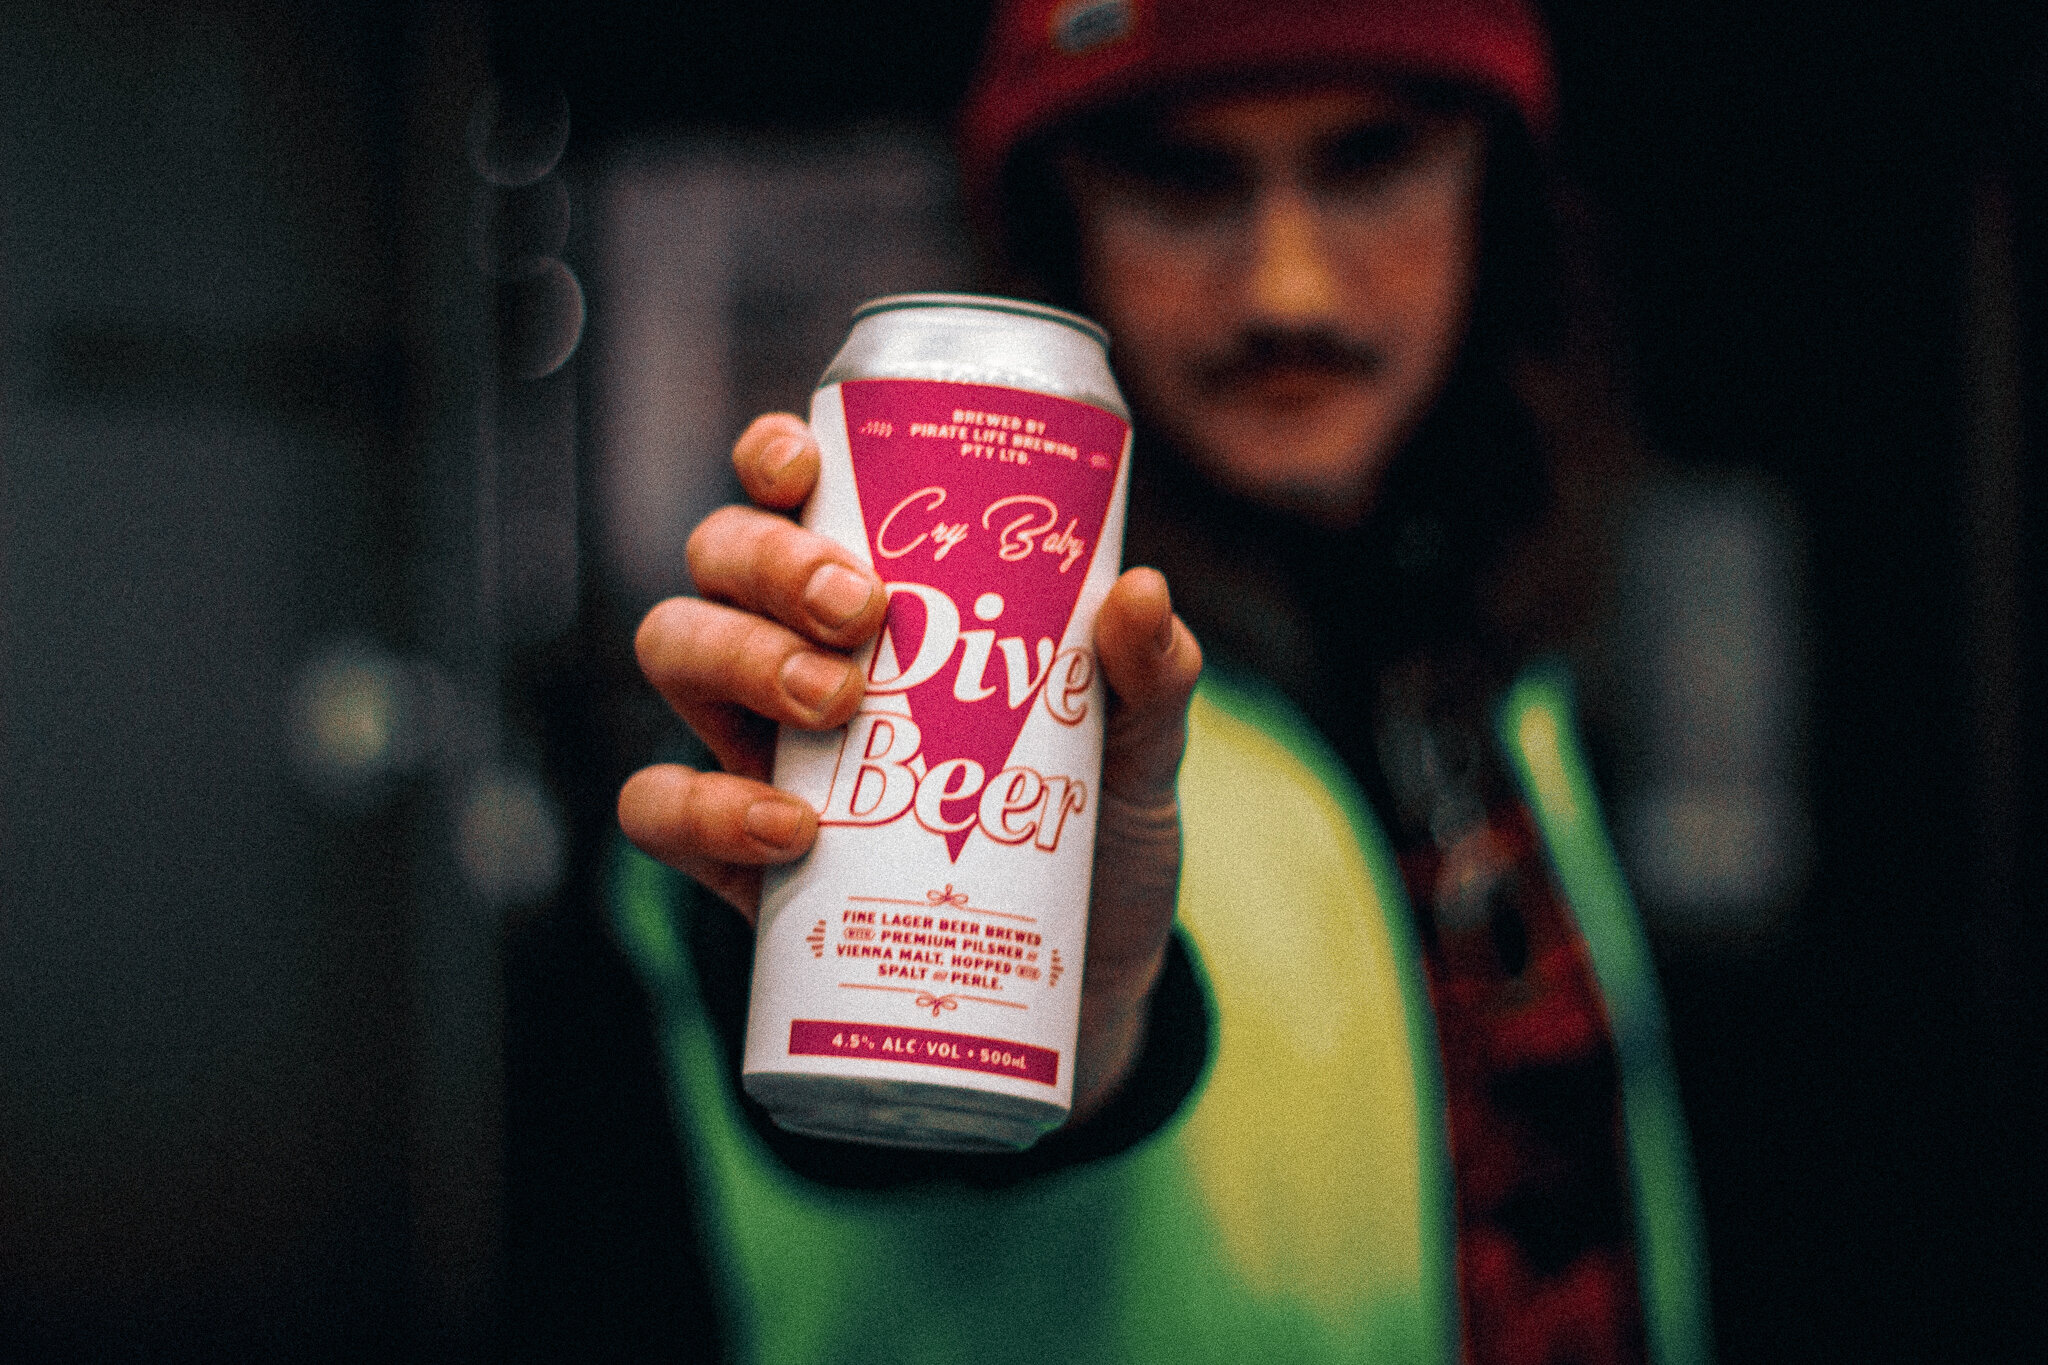 Dive Beer — Cry Baby